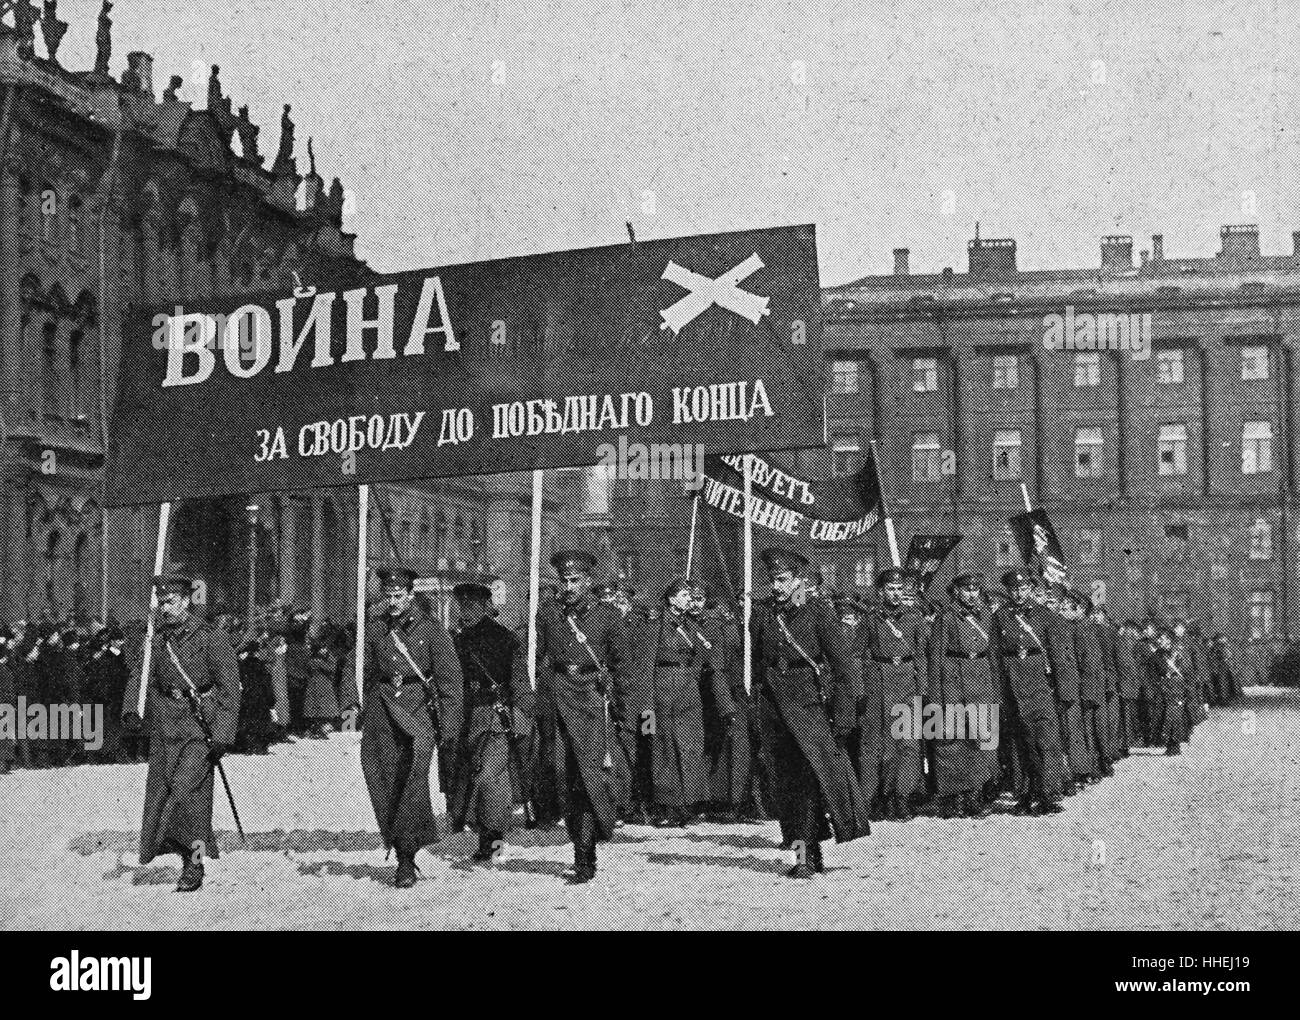 Photograph taken during the Bloody Sunday of 1905, when unarmed demonstrators led by Father Georgy Gapon were fired upon by soldiers of the Imperial Guard as they marched towards the Winter Palace to present a petition to Tsar Nicholas II of Russia. Dated 20th Century Stock Photo